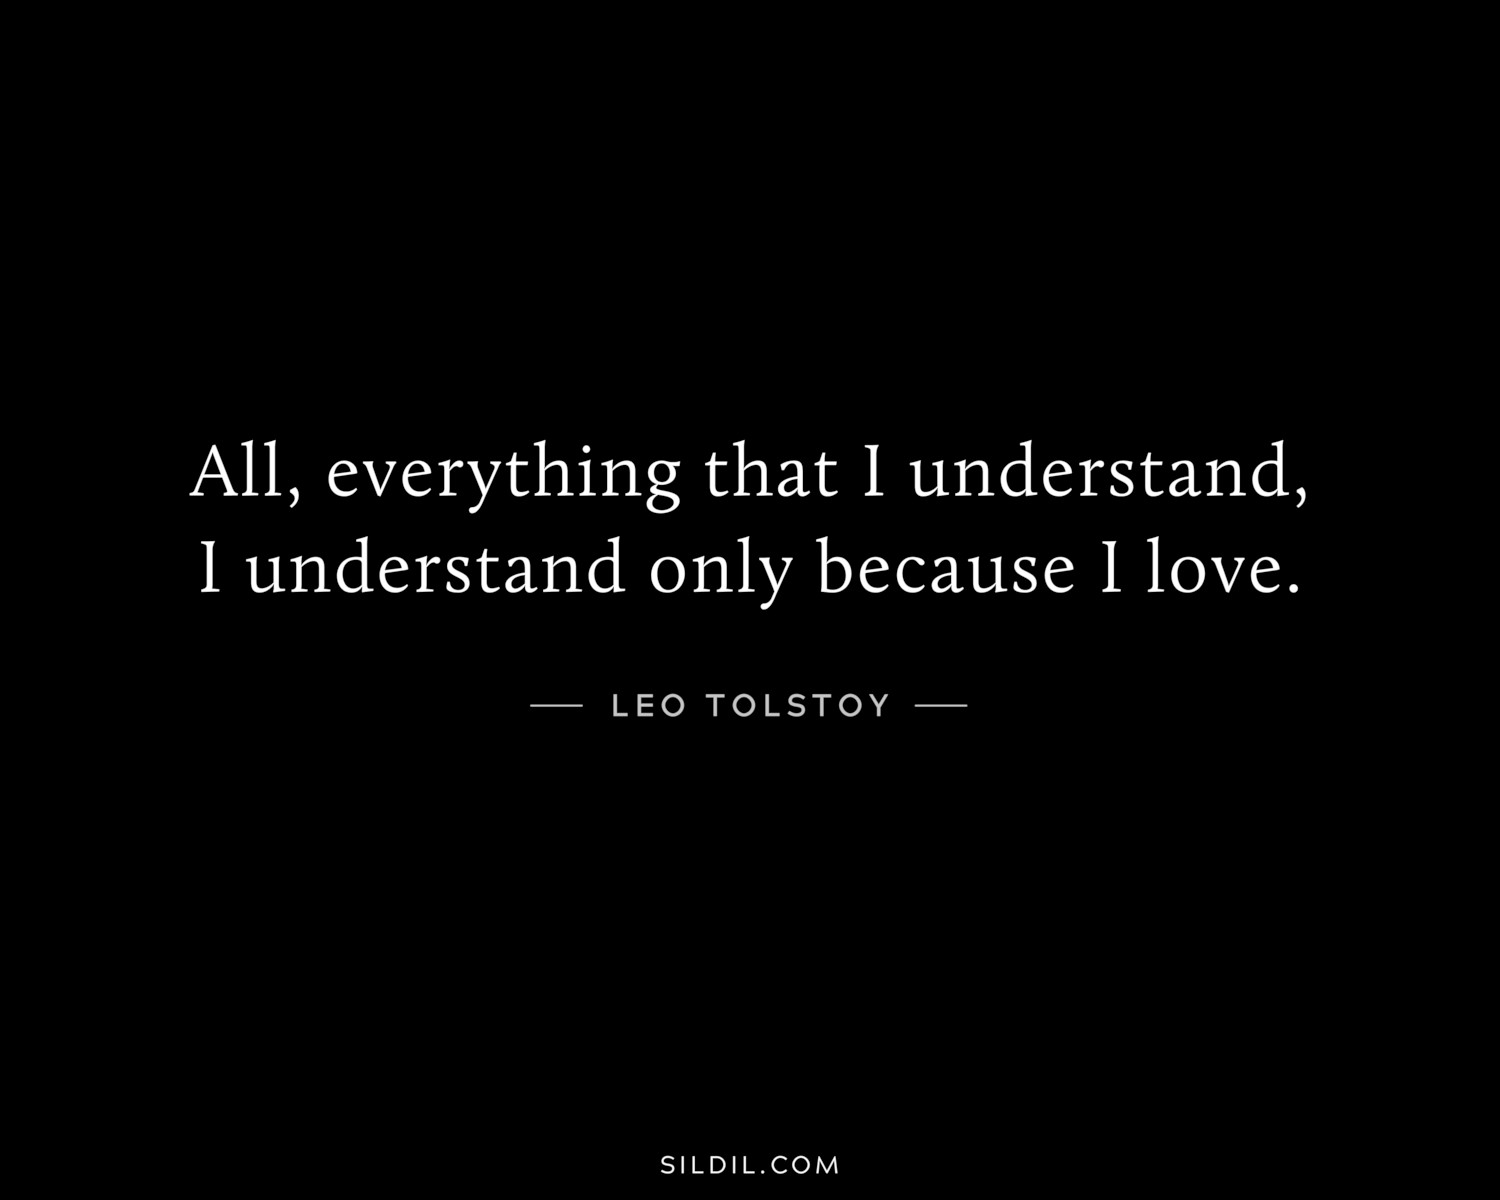 All, everything that I understand, I understand only because I love.